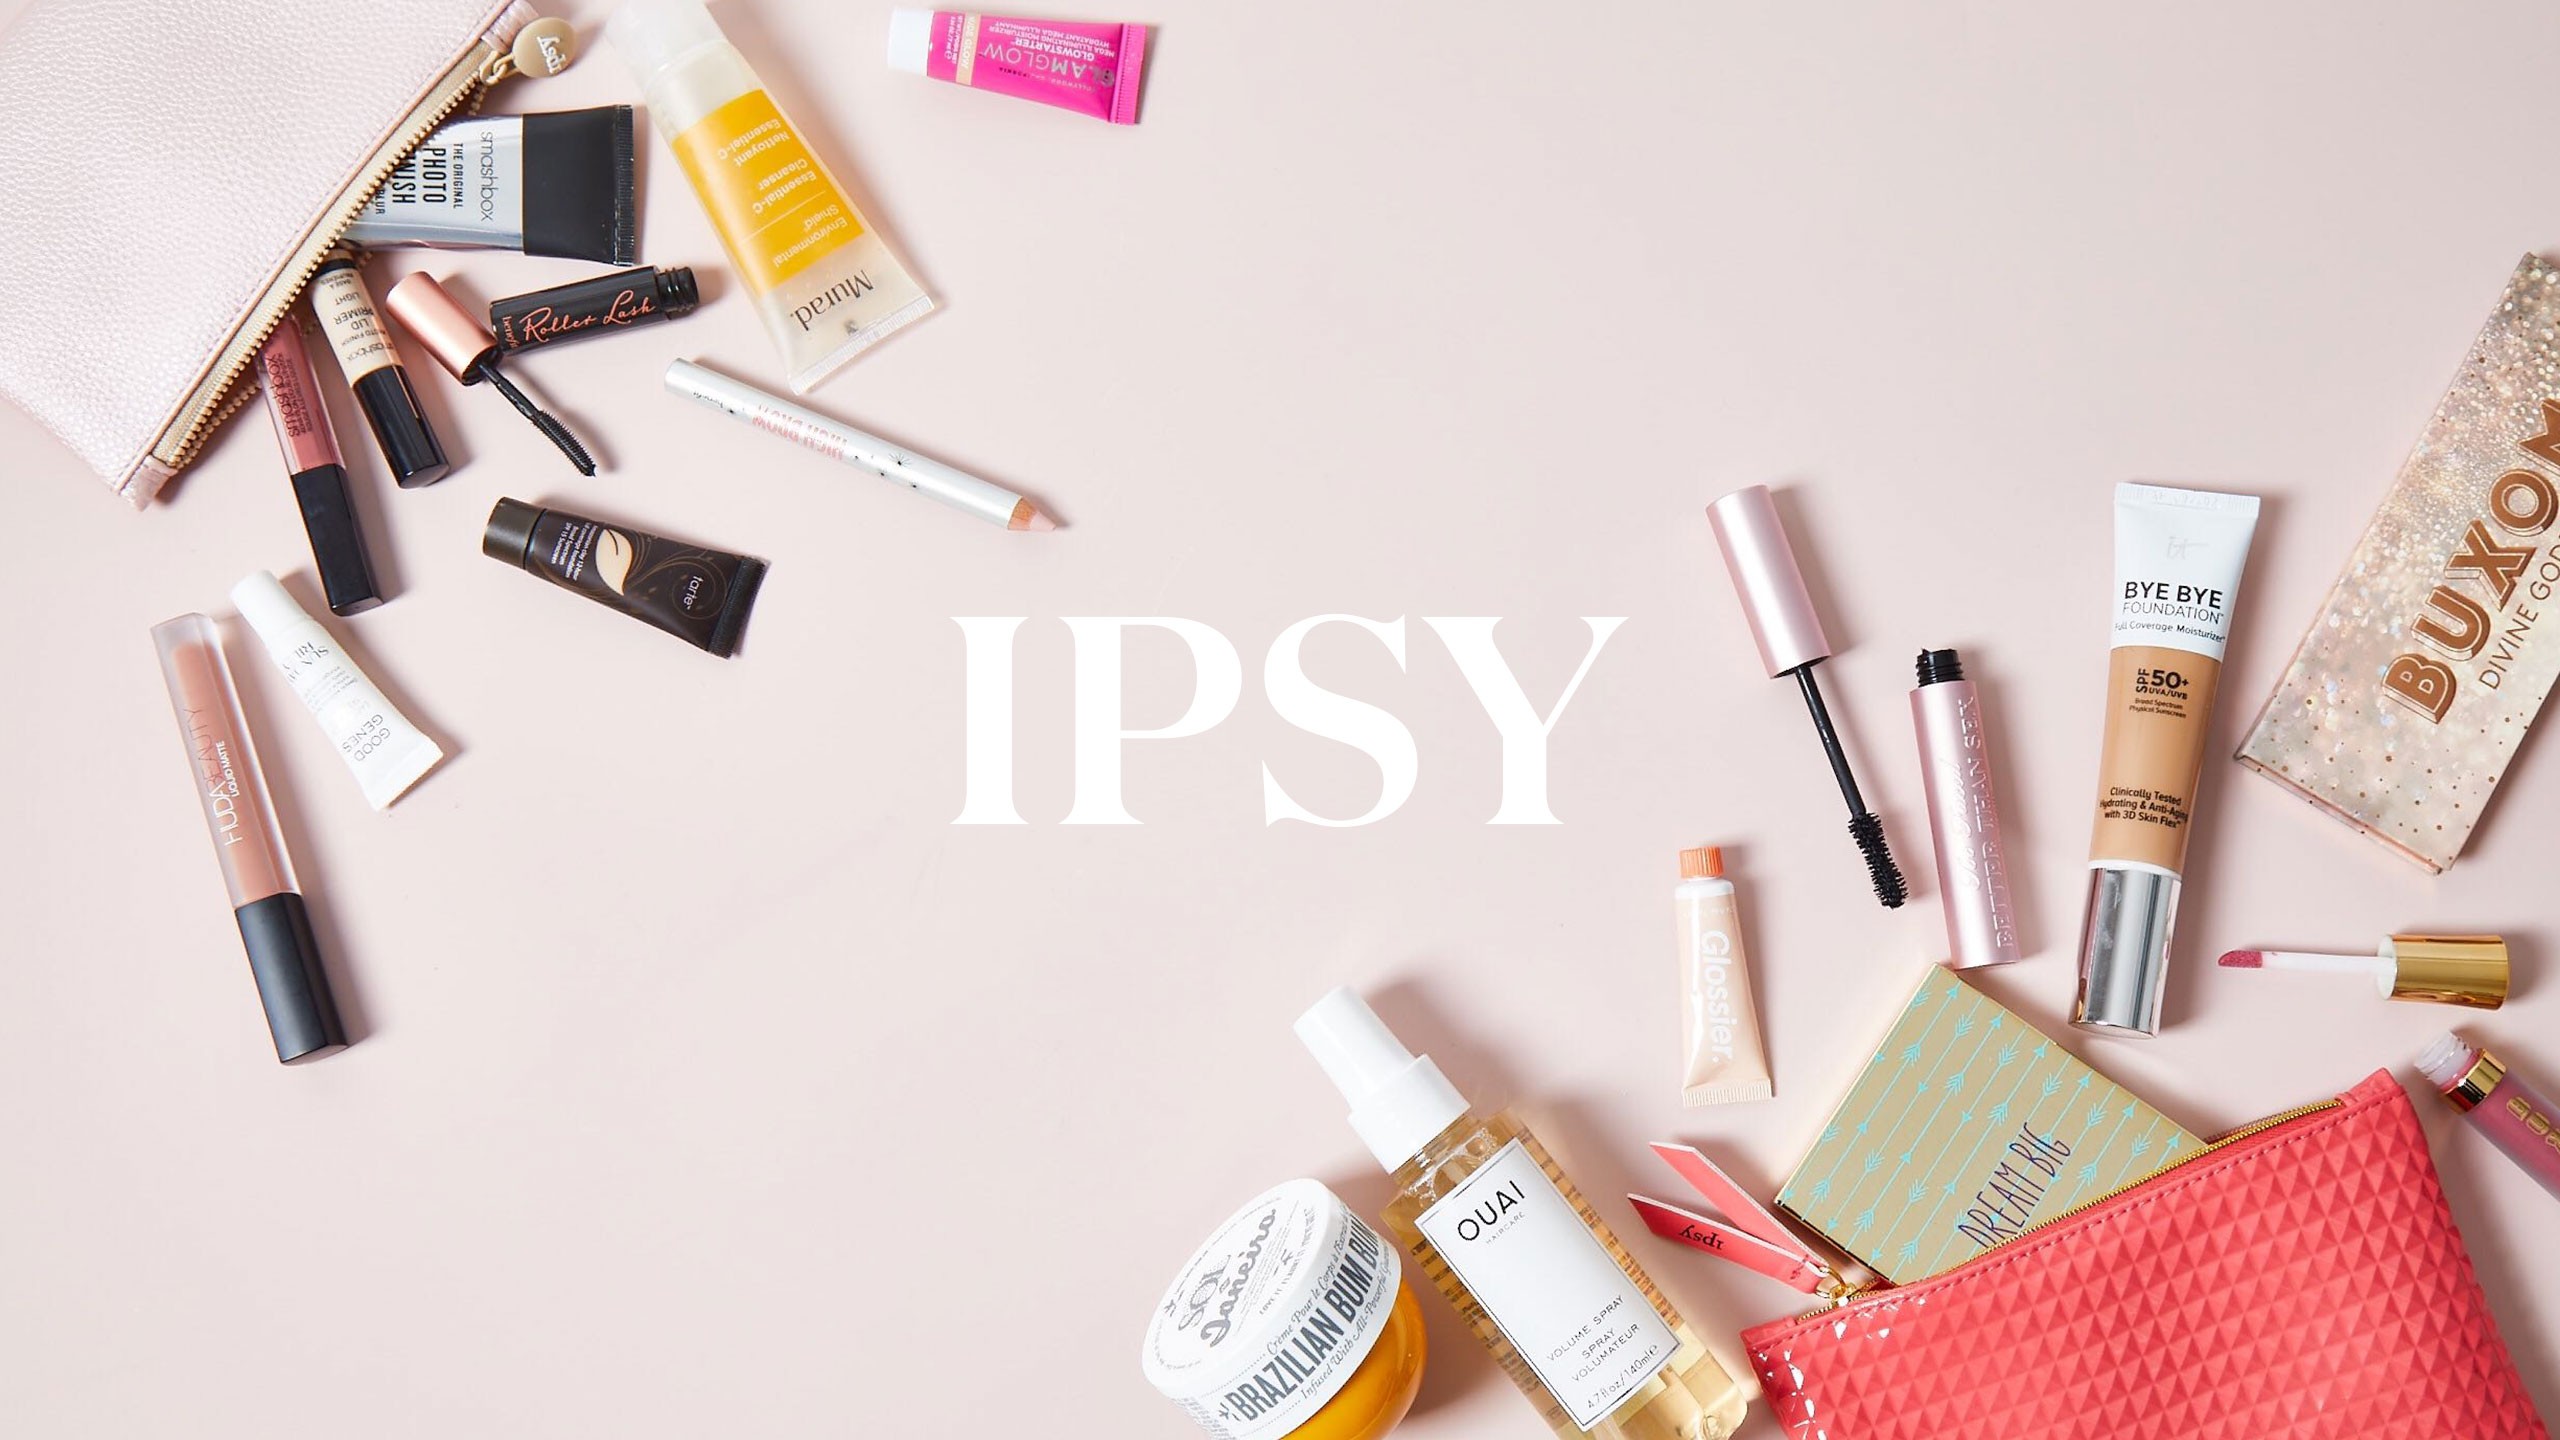 How to Contact Customer Care for the Makeup Subscription Ipsy 】1Sep2019